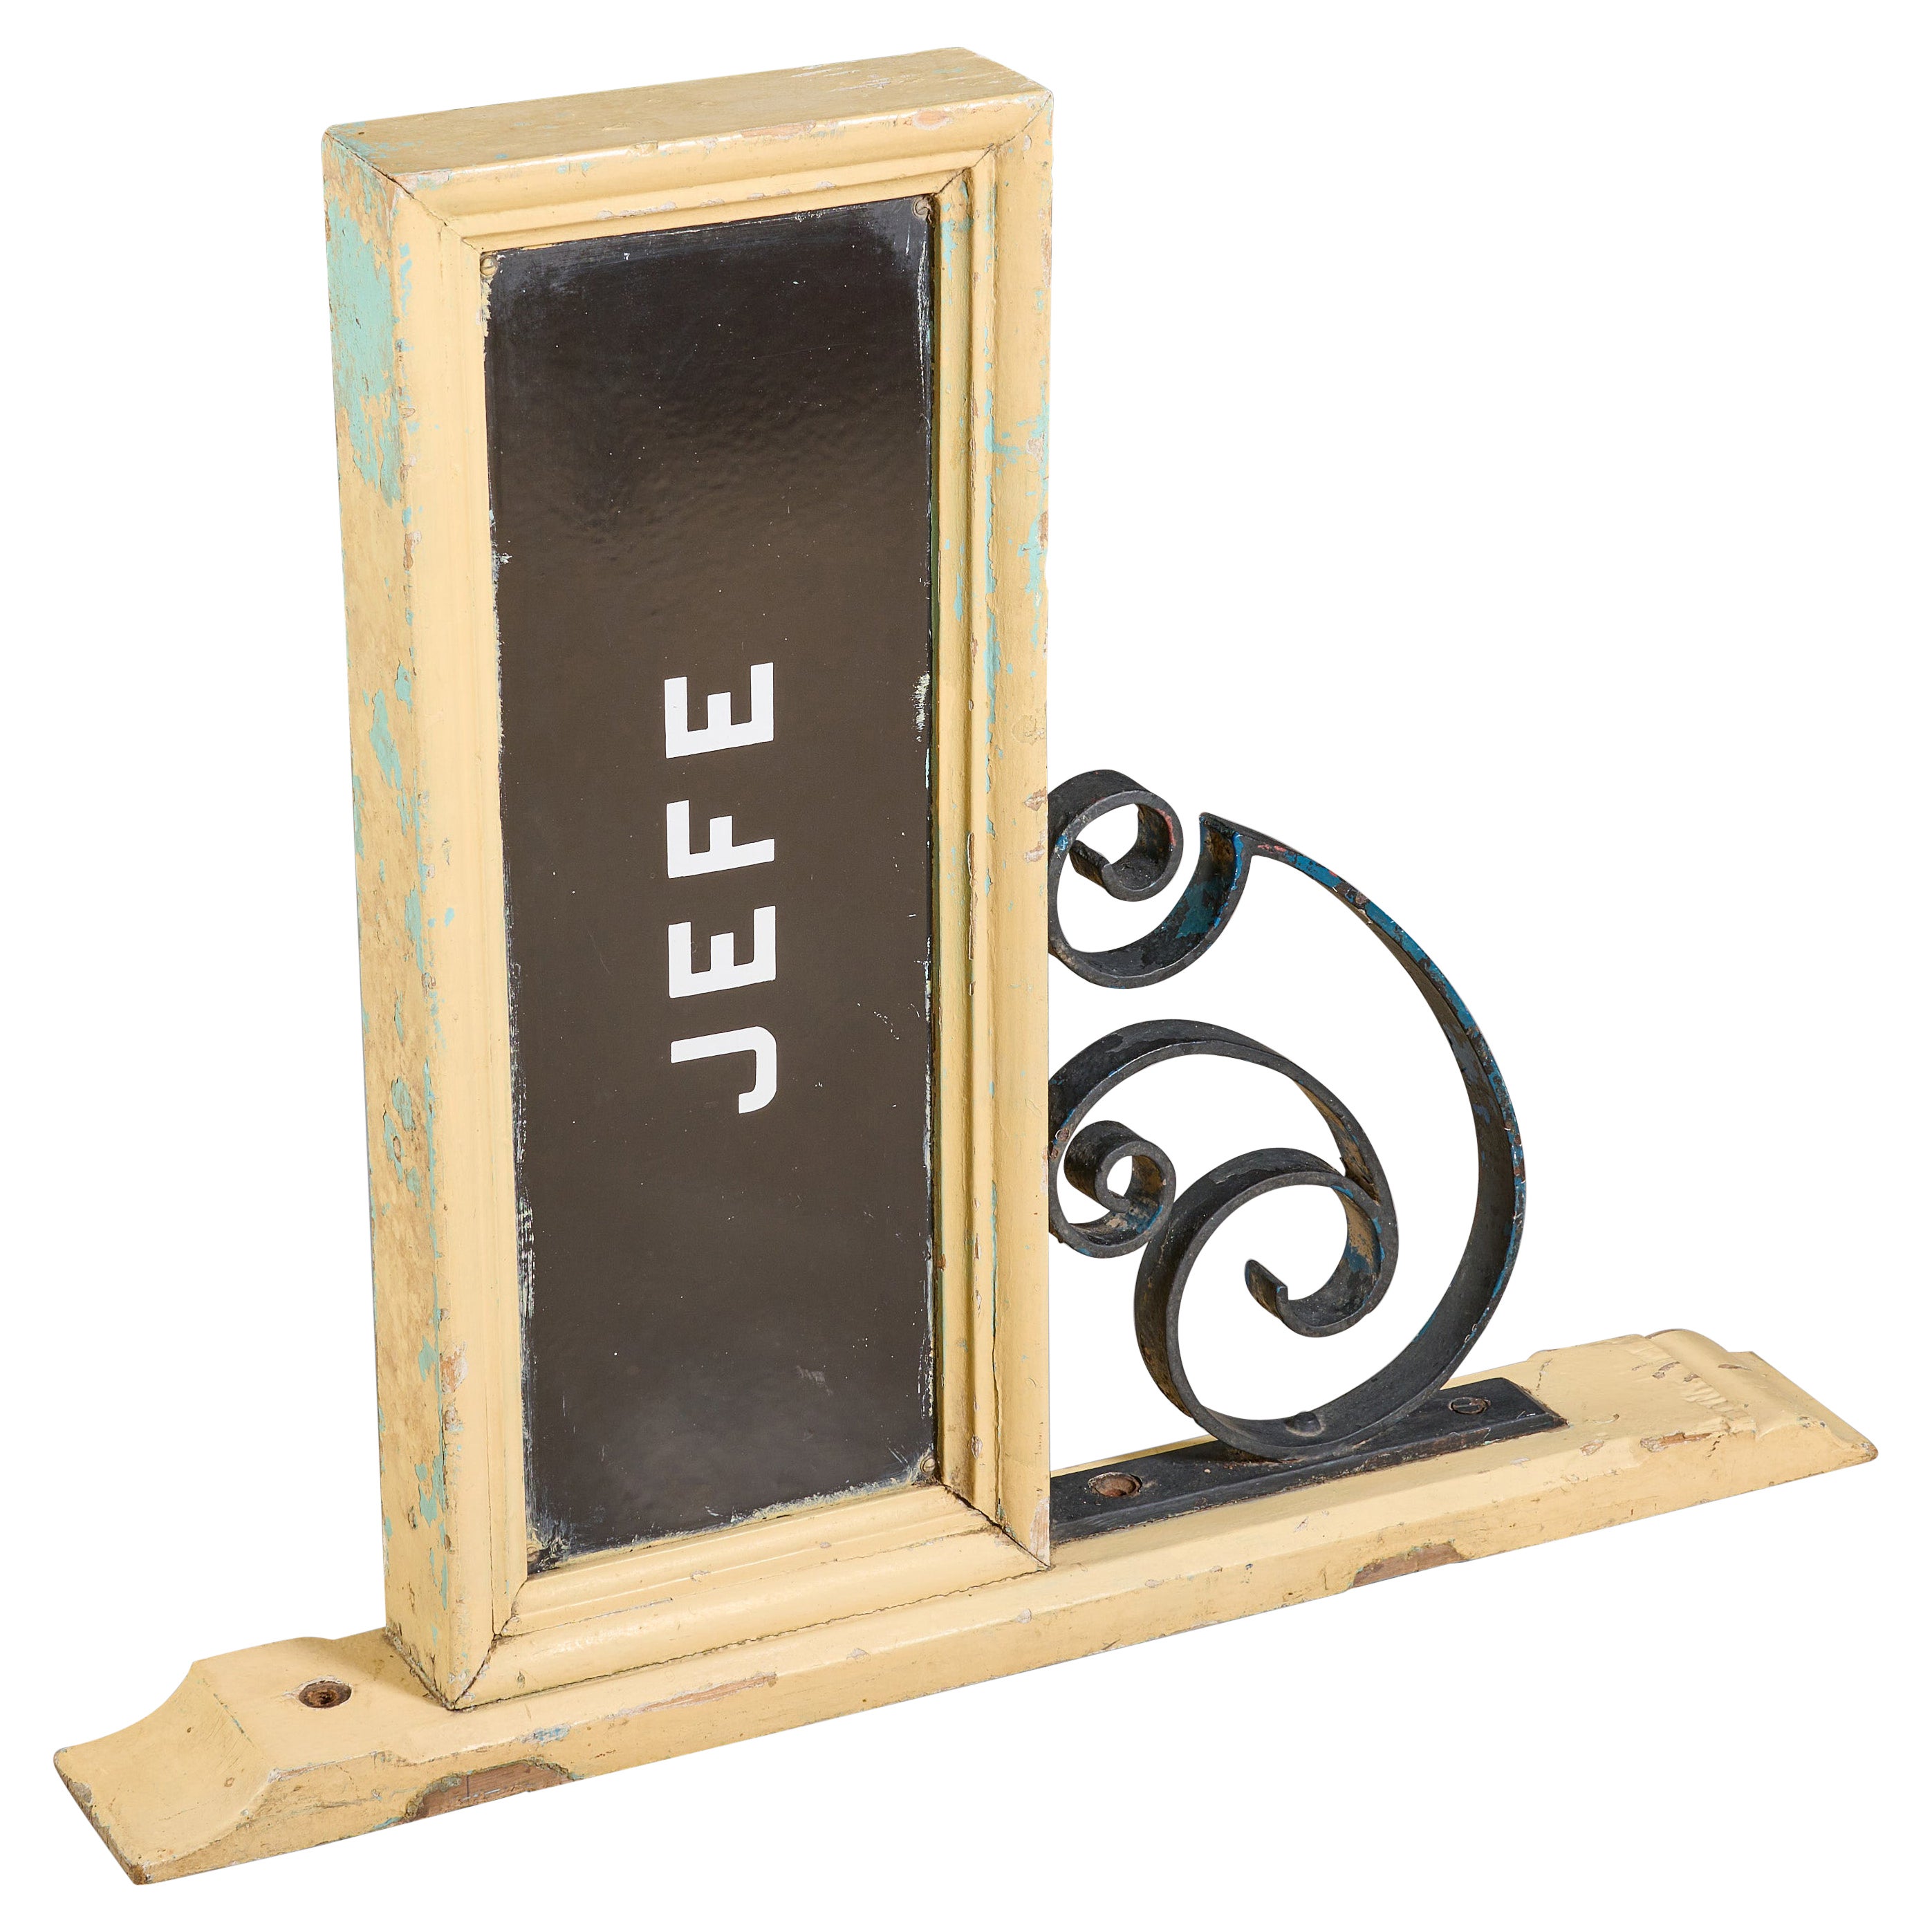 Wood, Iron and Enamel "Jefe" Sign For Sale